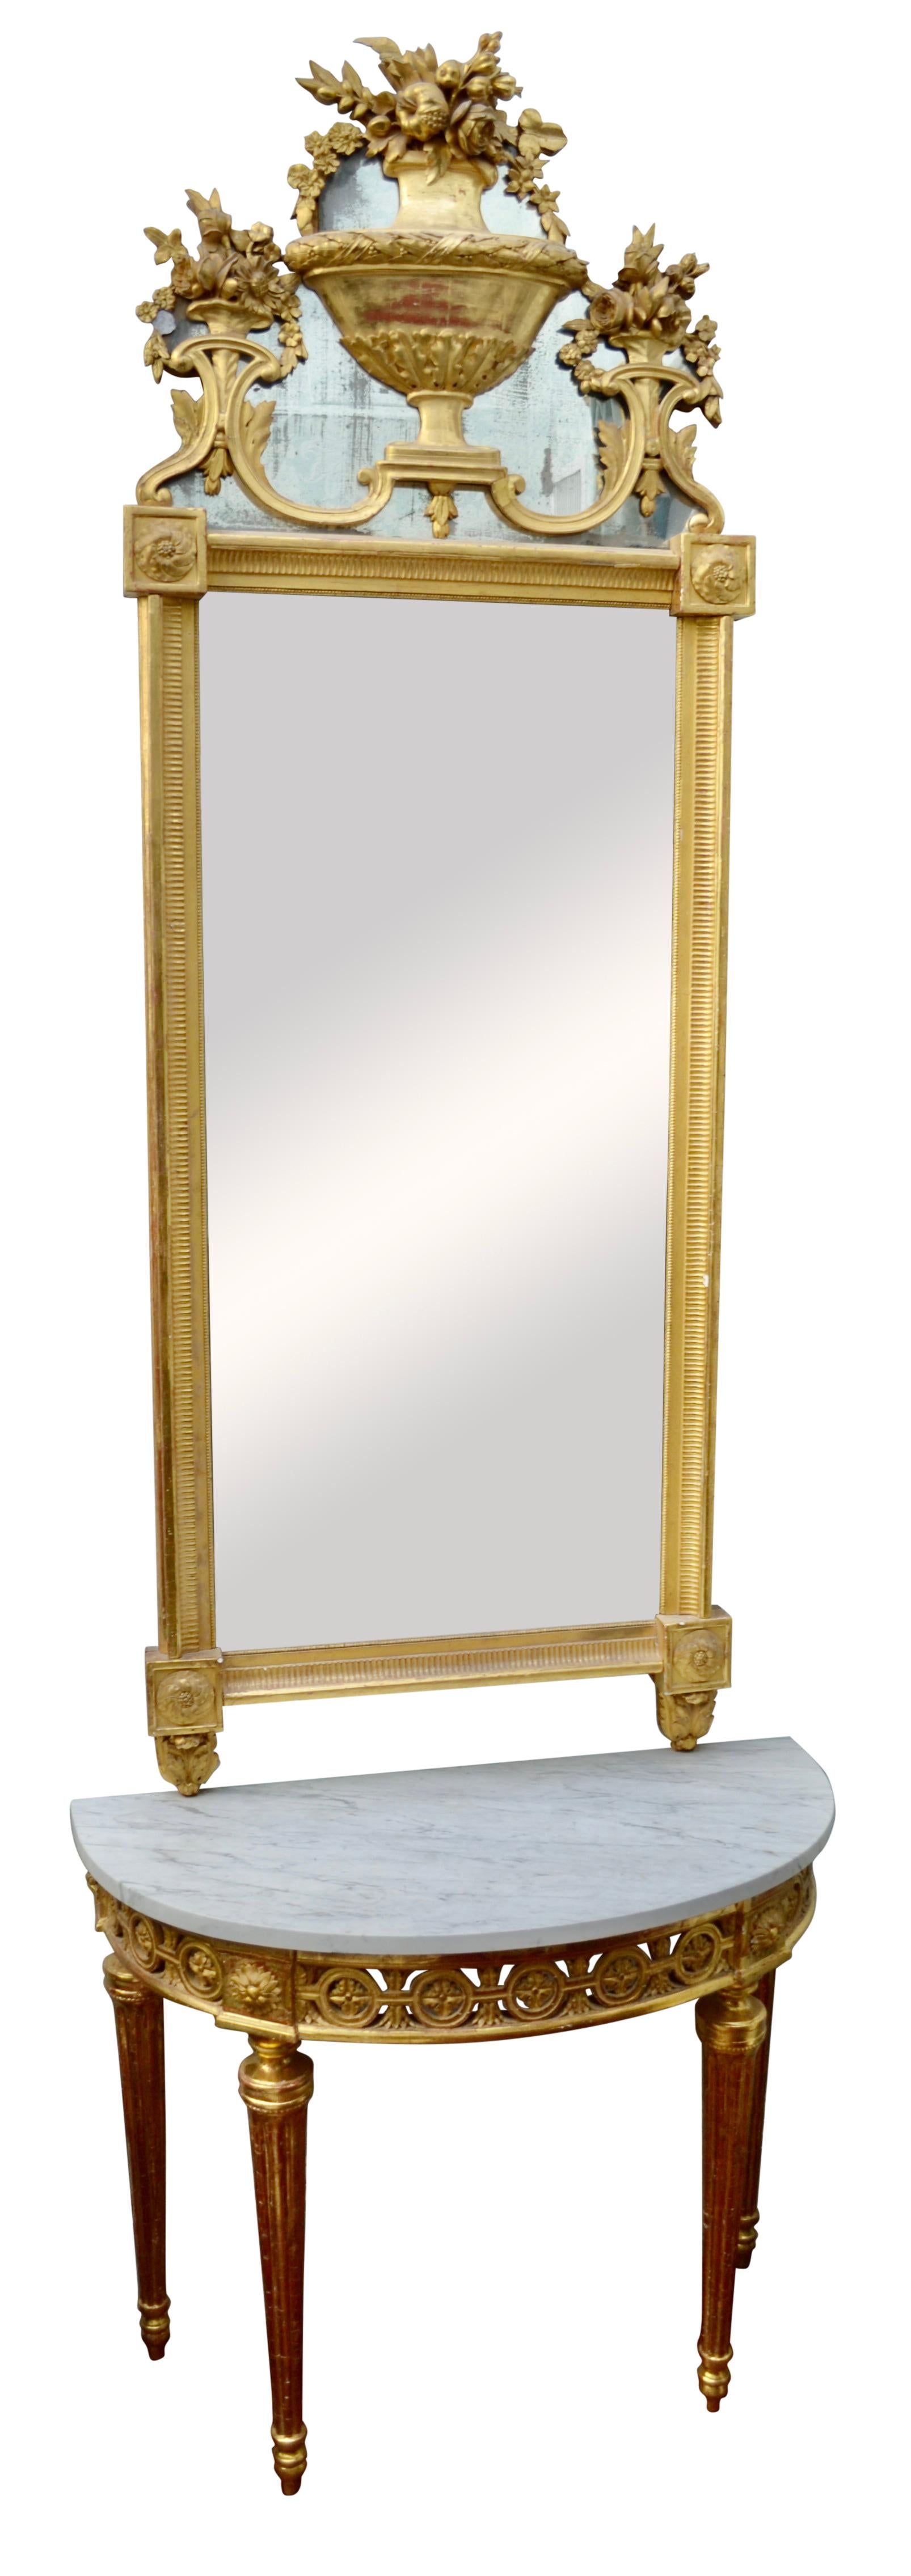 Late 18th Century Italian Giltwood Mirror and Demilune Console For Sale 2